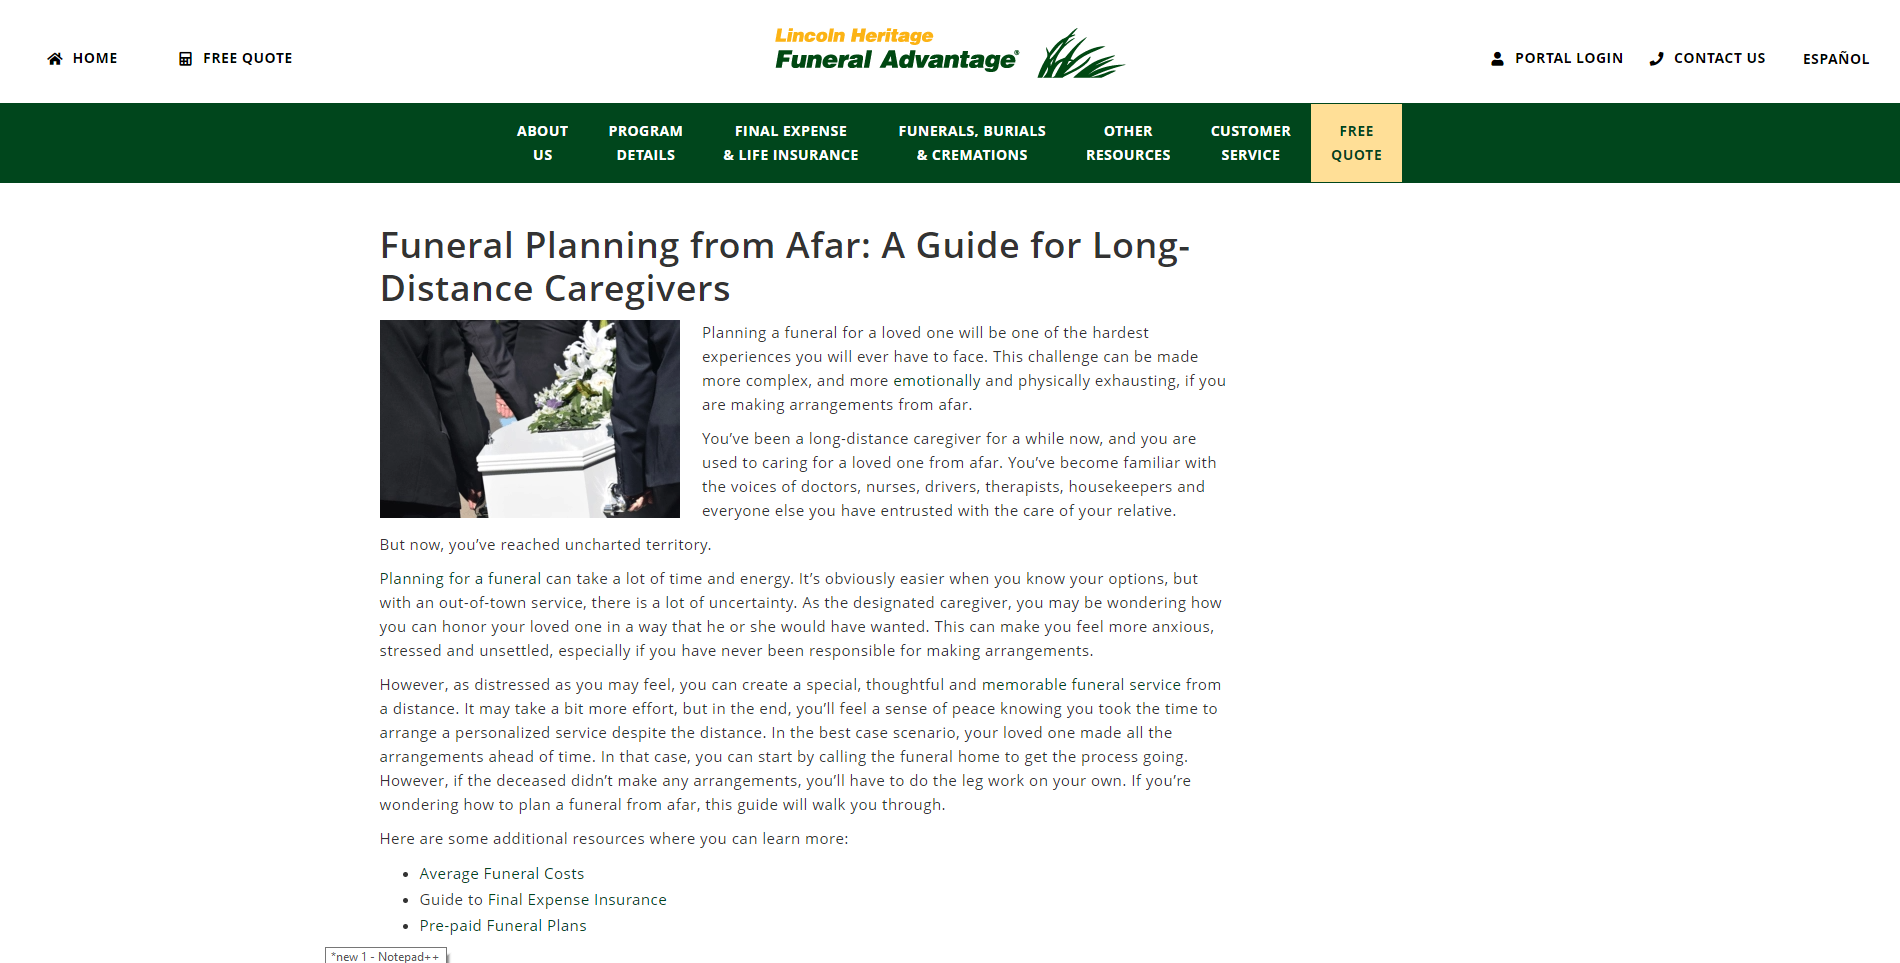 Funeral Planning from Afar: A Guide for Long-Distance Caregivers